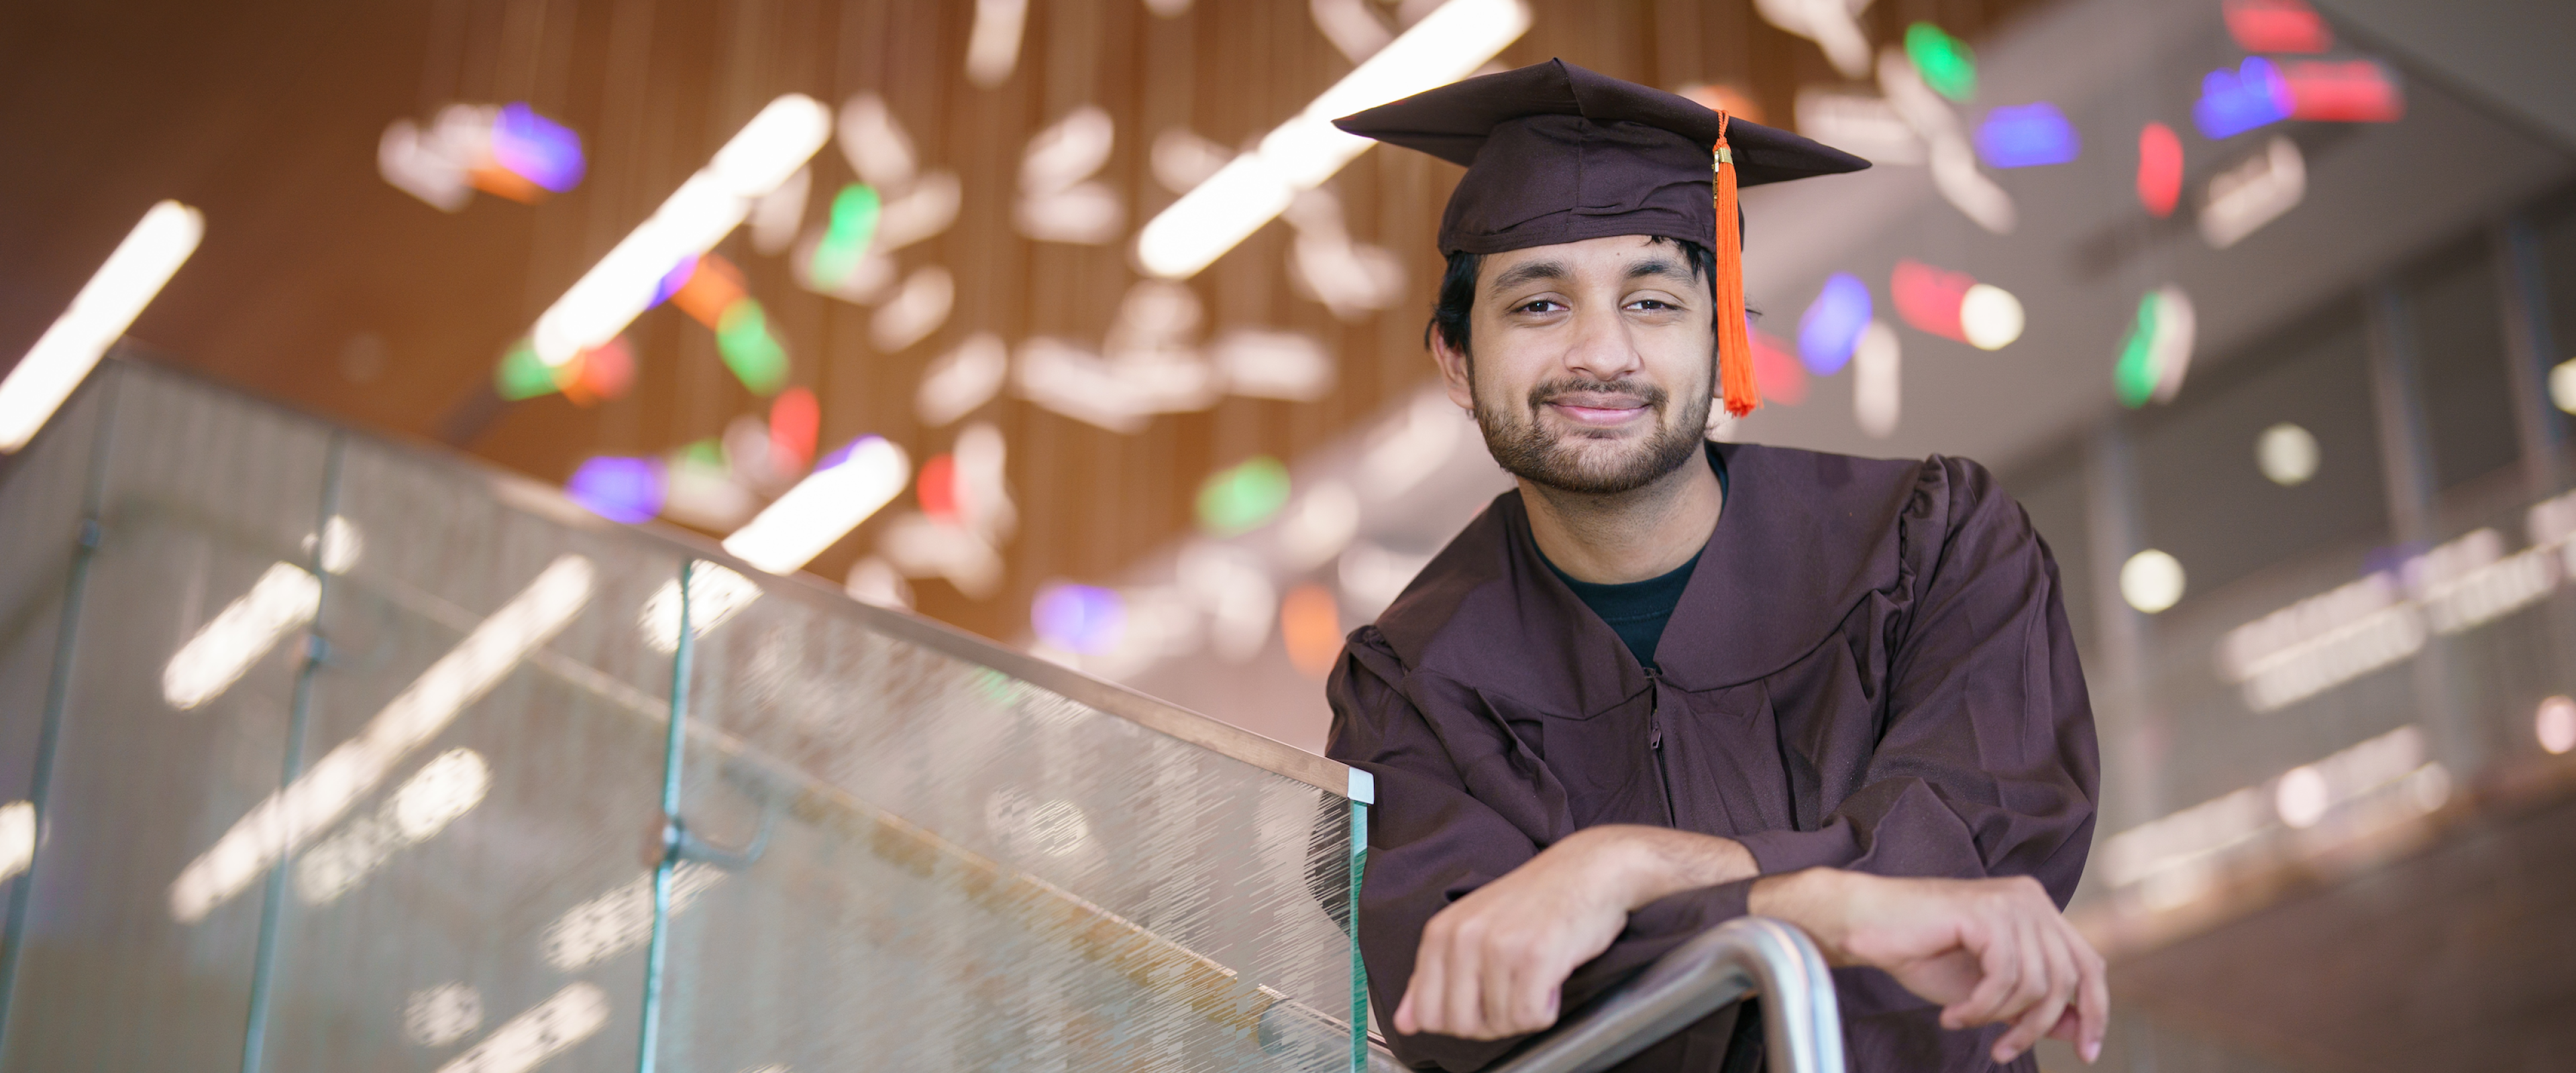 Bharat Goel leans on a railing while wearing his graduation cap and gown.